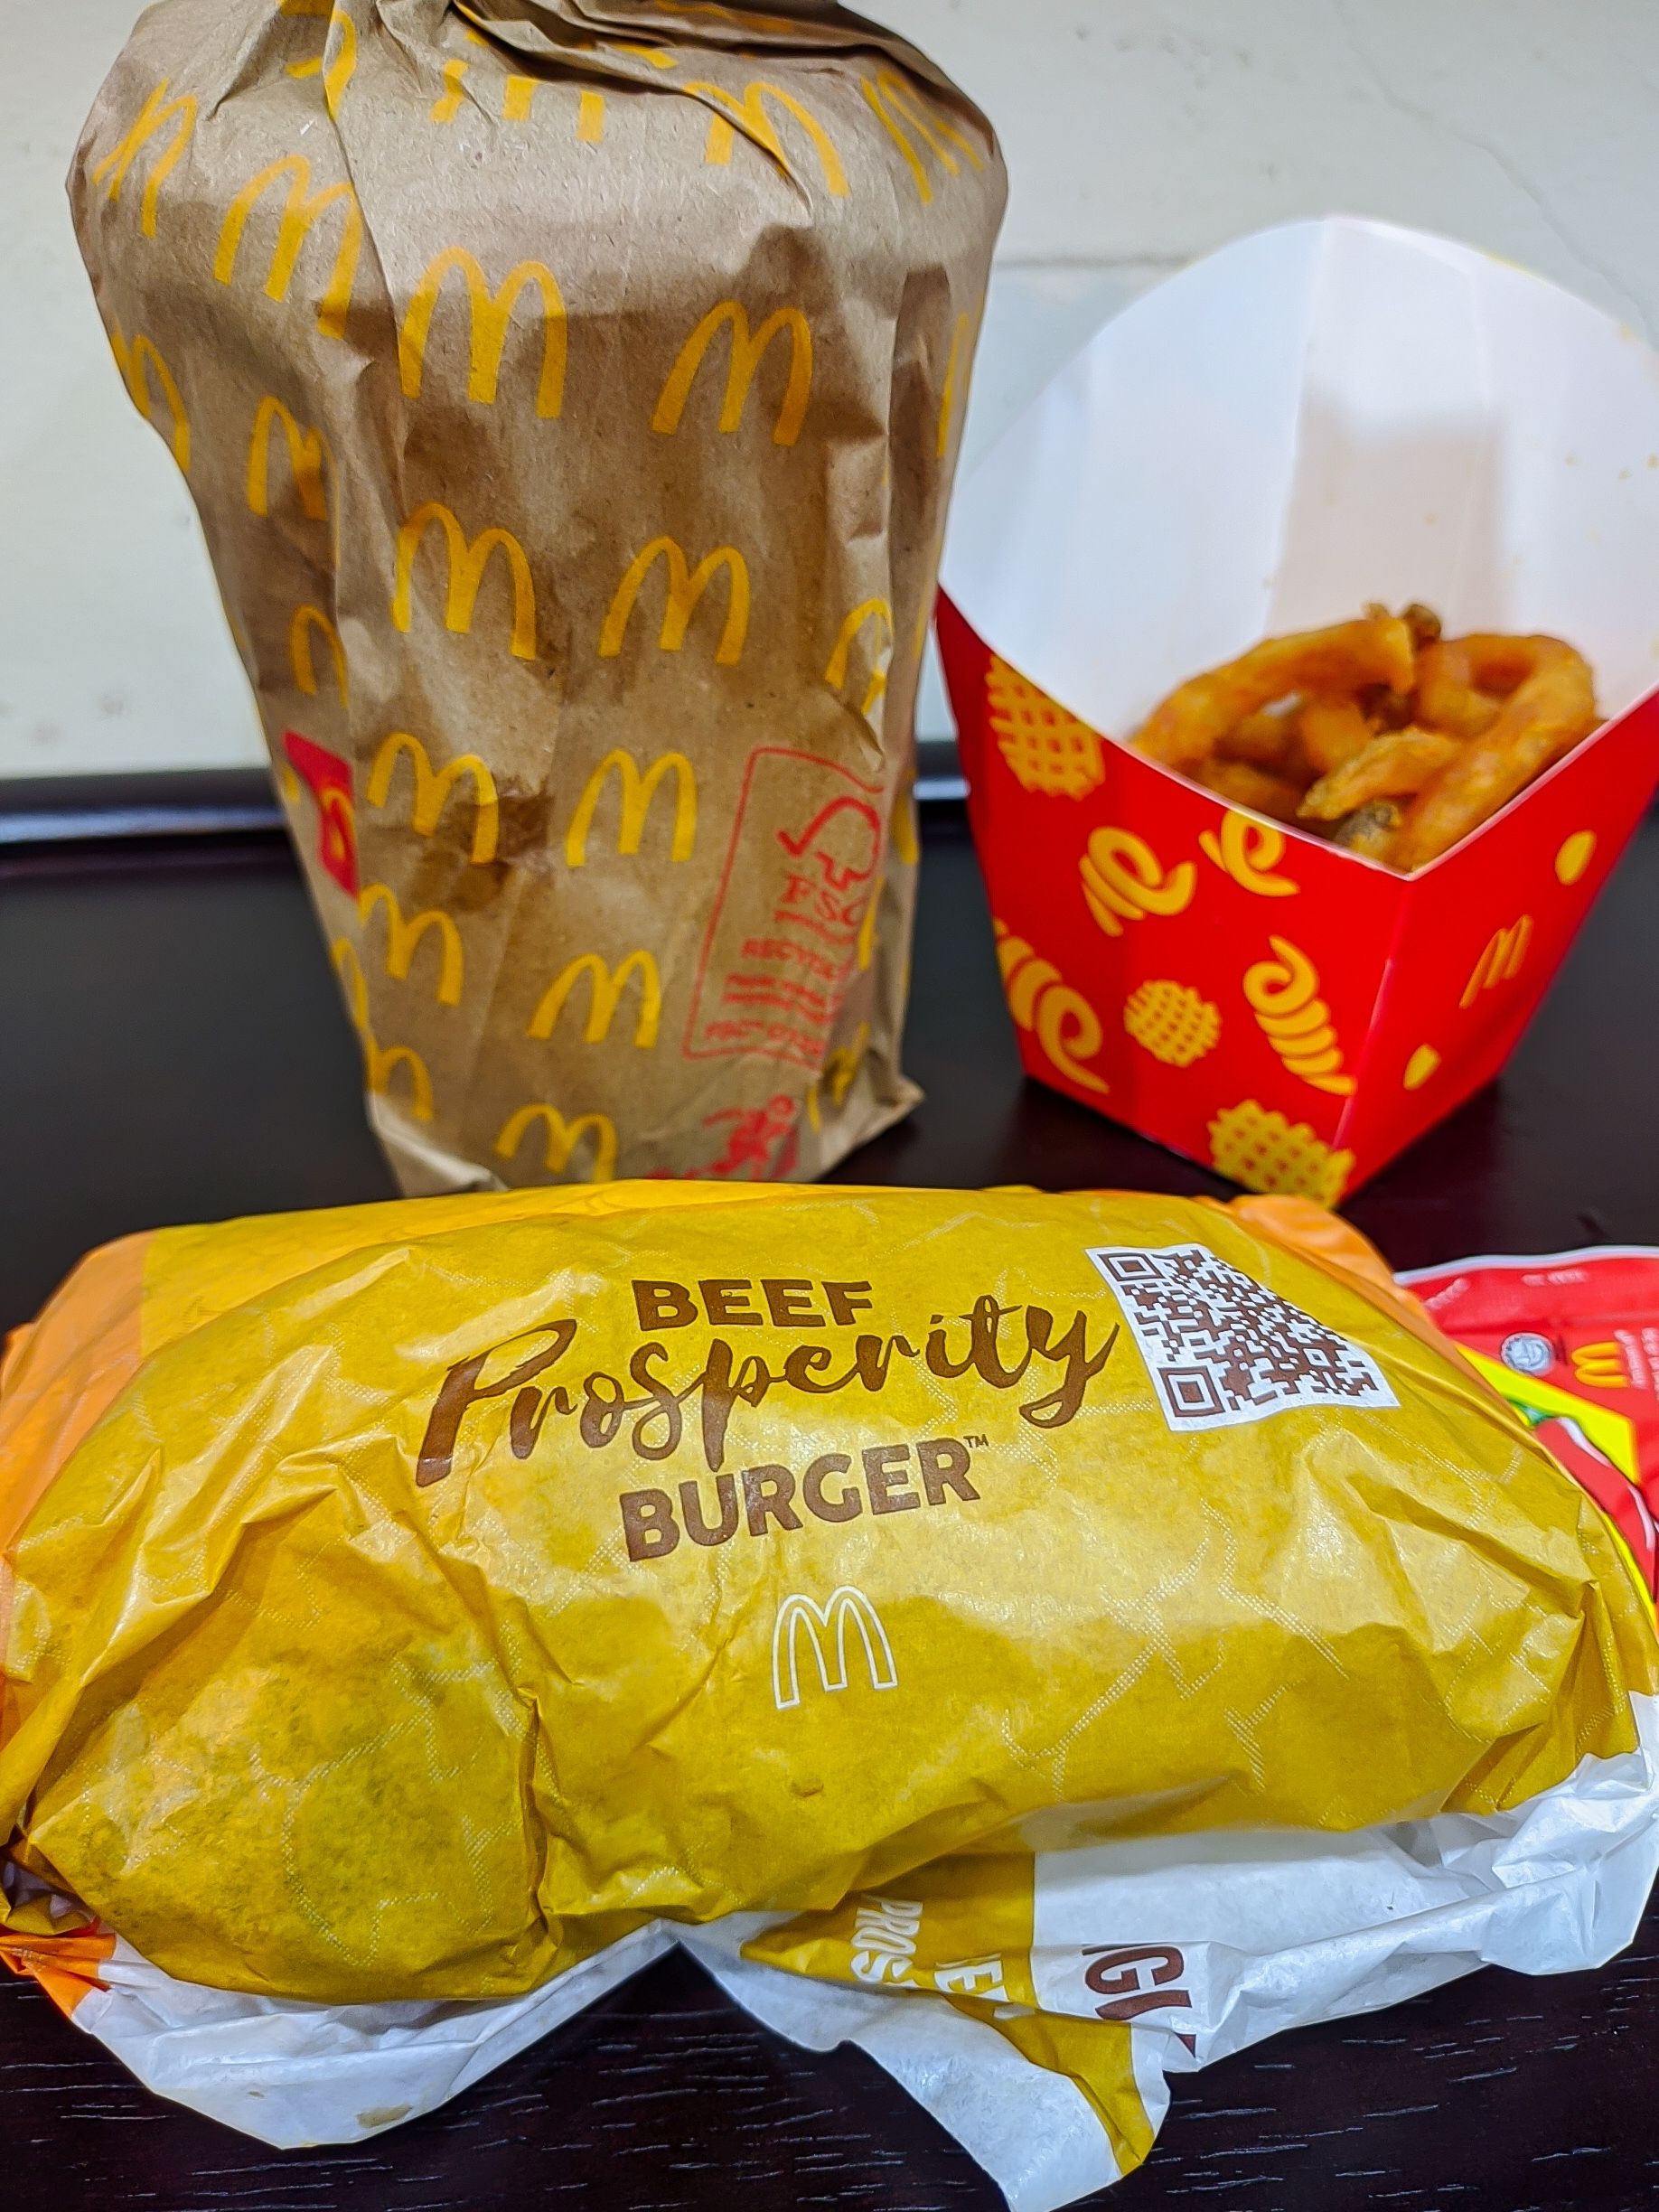 The beef Prosperity Burger at McDonald's in Asia